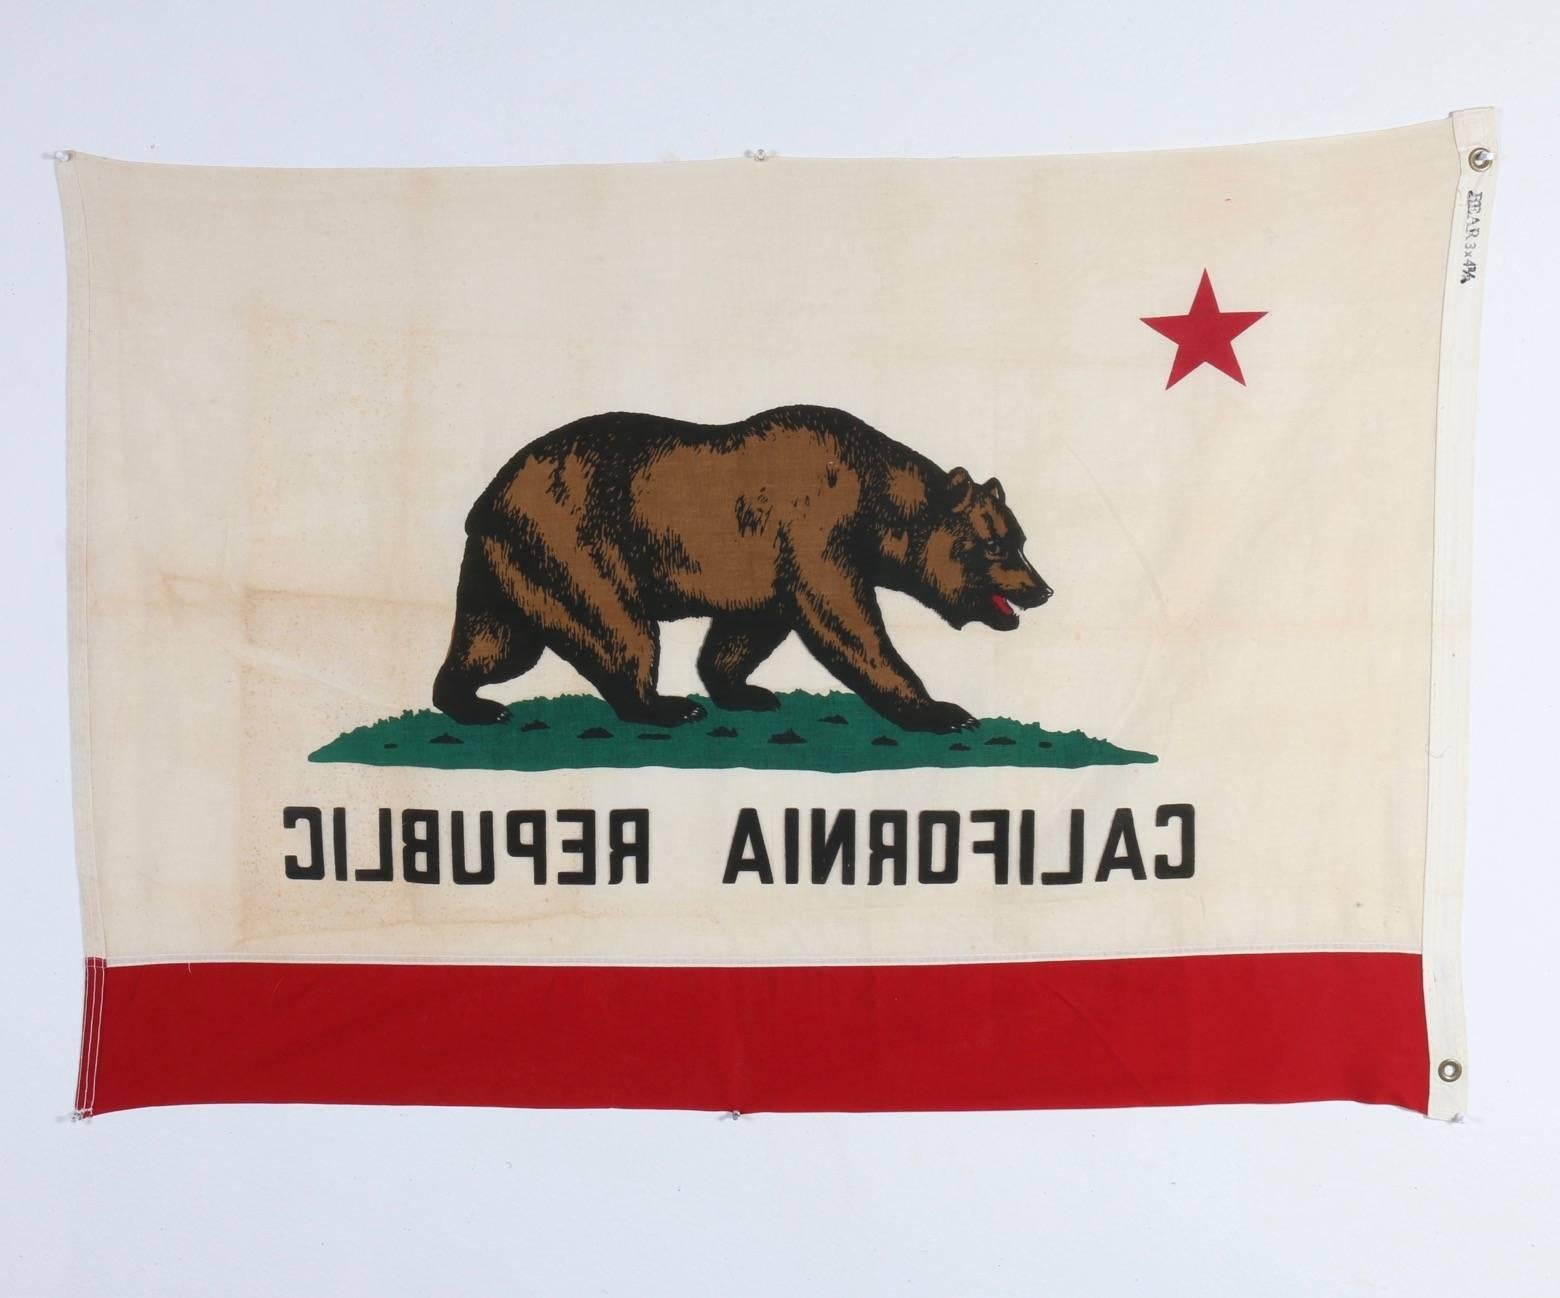 This is the original vintage cotton California flag measure 3 x 4.5 feet that you've been waiting for. Colors are still bright and vibrant, yet the flag exhibits wonderful patina and authentic aging.

Folds for shipping.